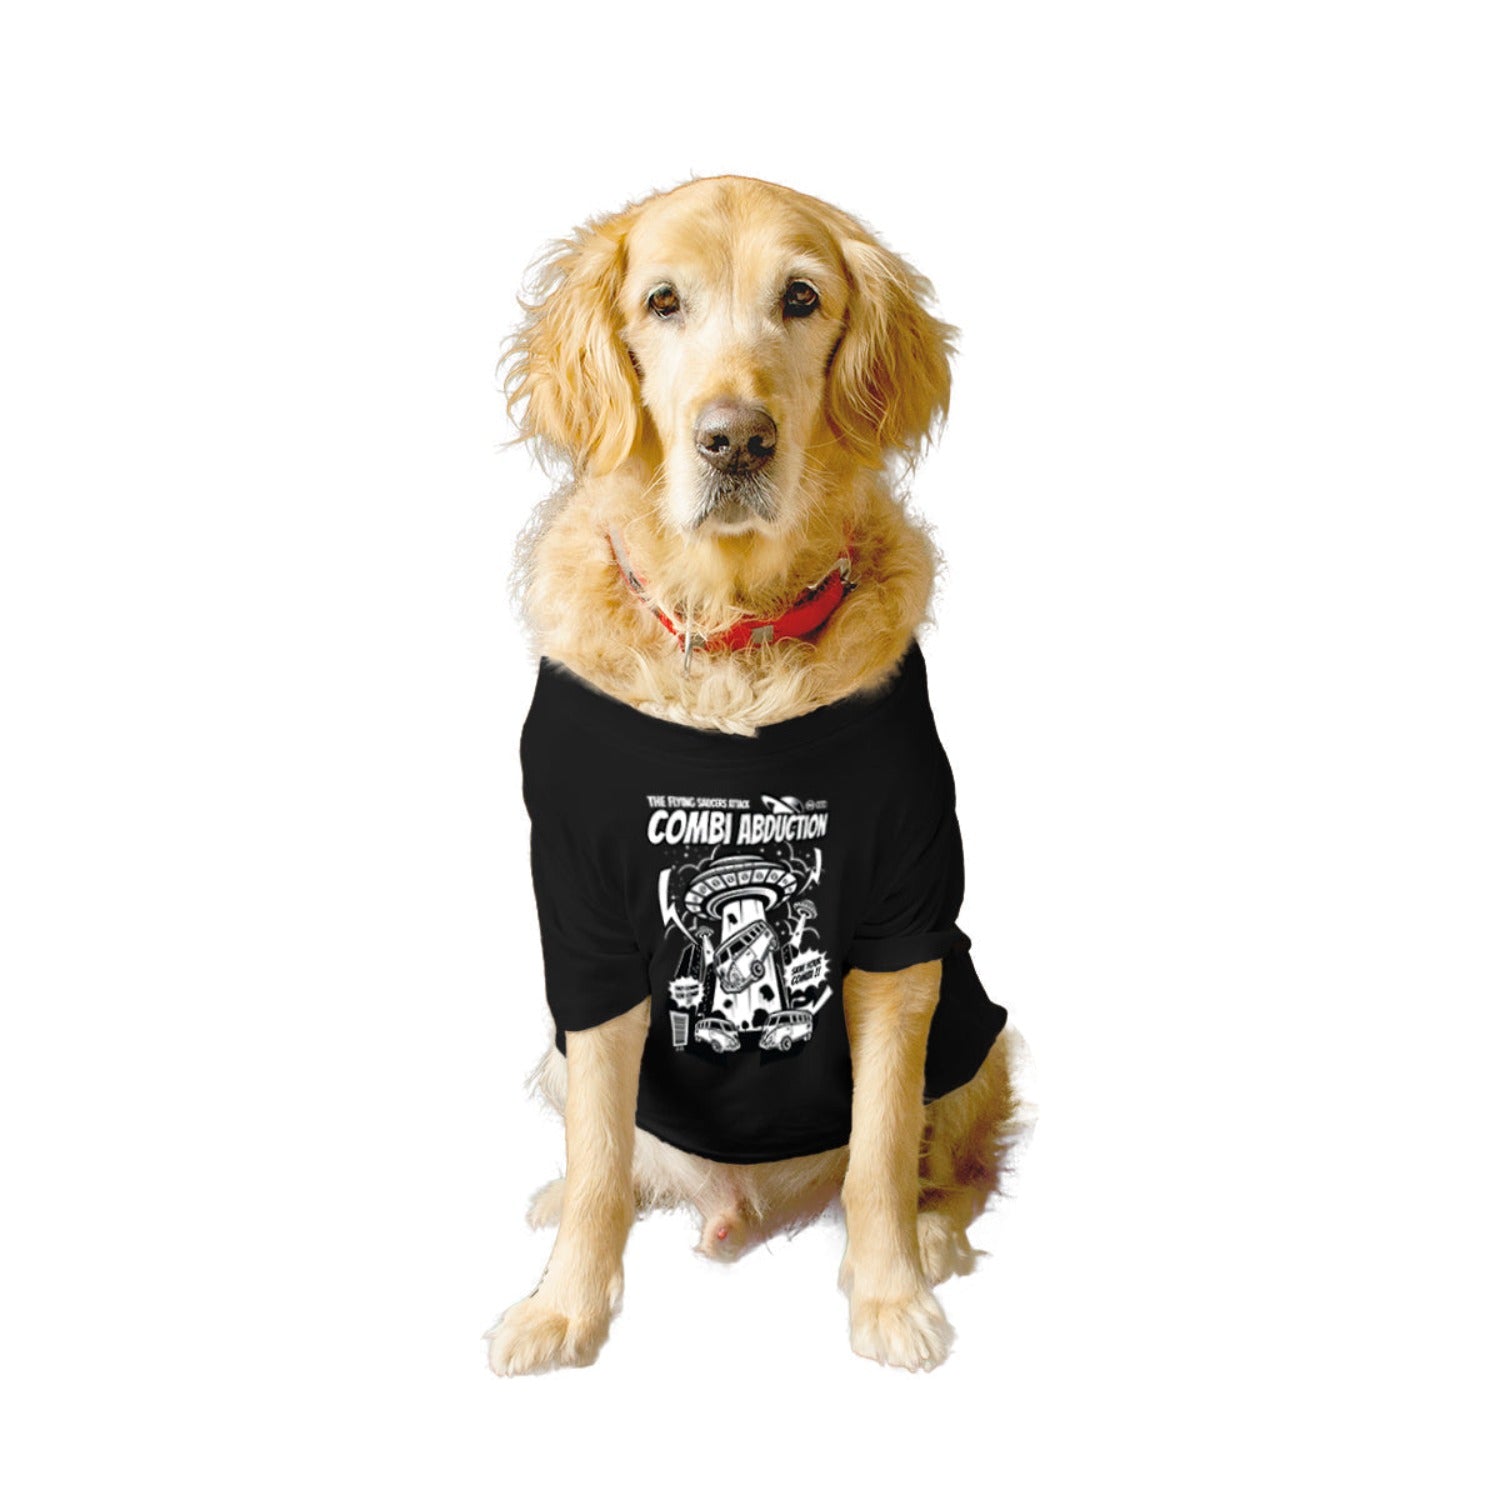 Ruse XX-Small (Chihuahuas, Papillons) / Black Ruse Basic Crew Neck "COMBI ABDUCTION" Printed Half Sleeves Dog Tee